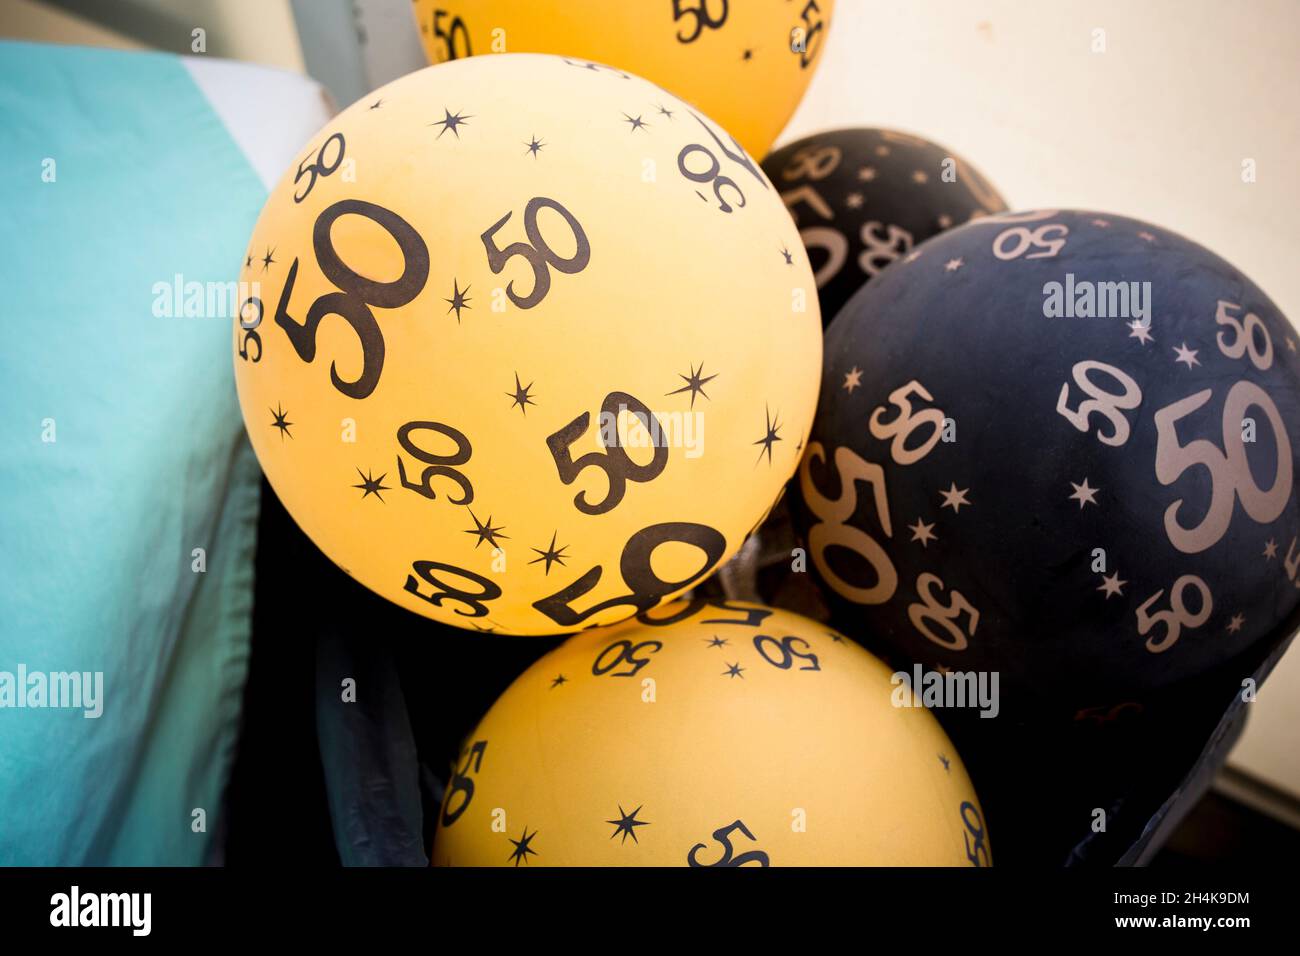 Soft balloons to decorate love celebrations. 50th wedding anniversary. Stock Photo